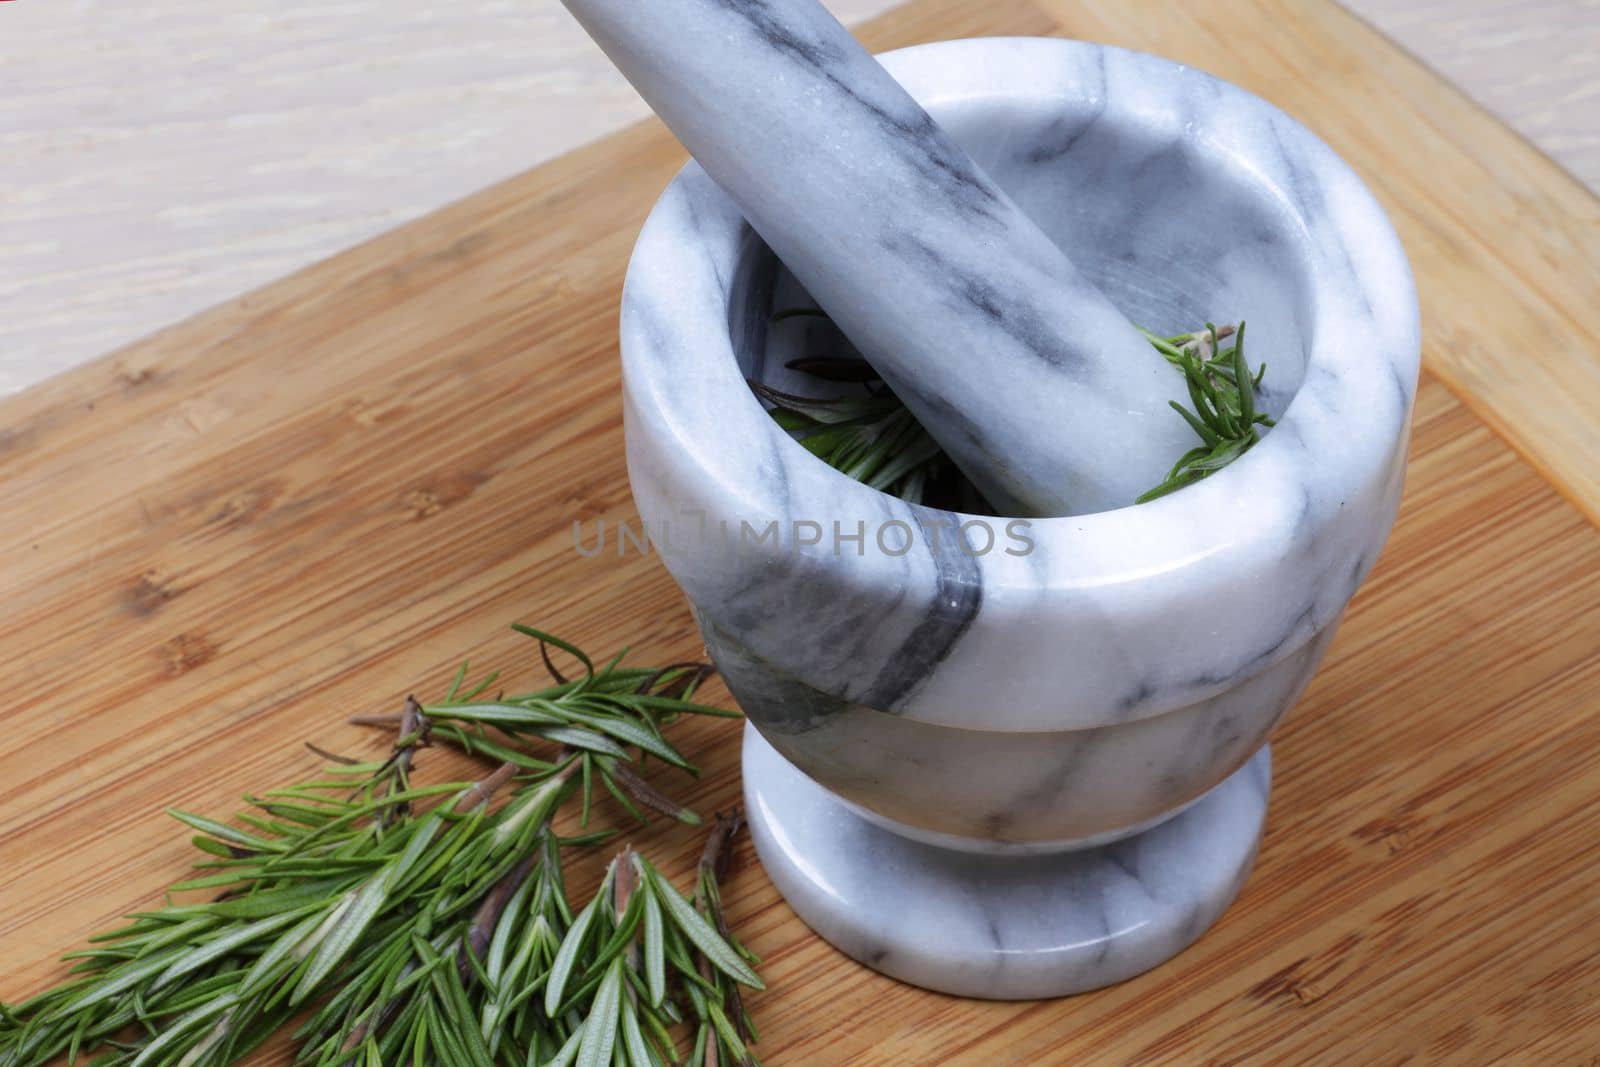 Rosemary herb being ground in a mortar and pestle from above